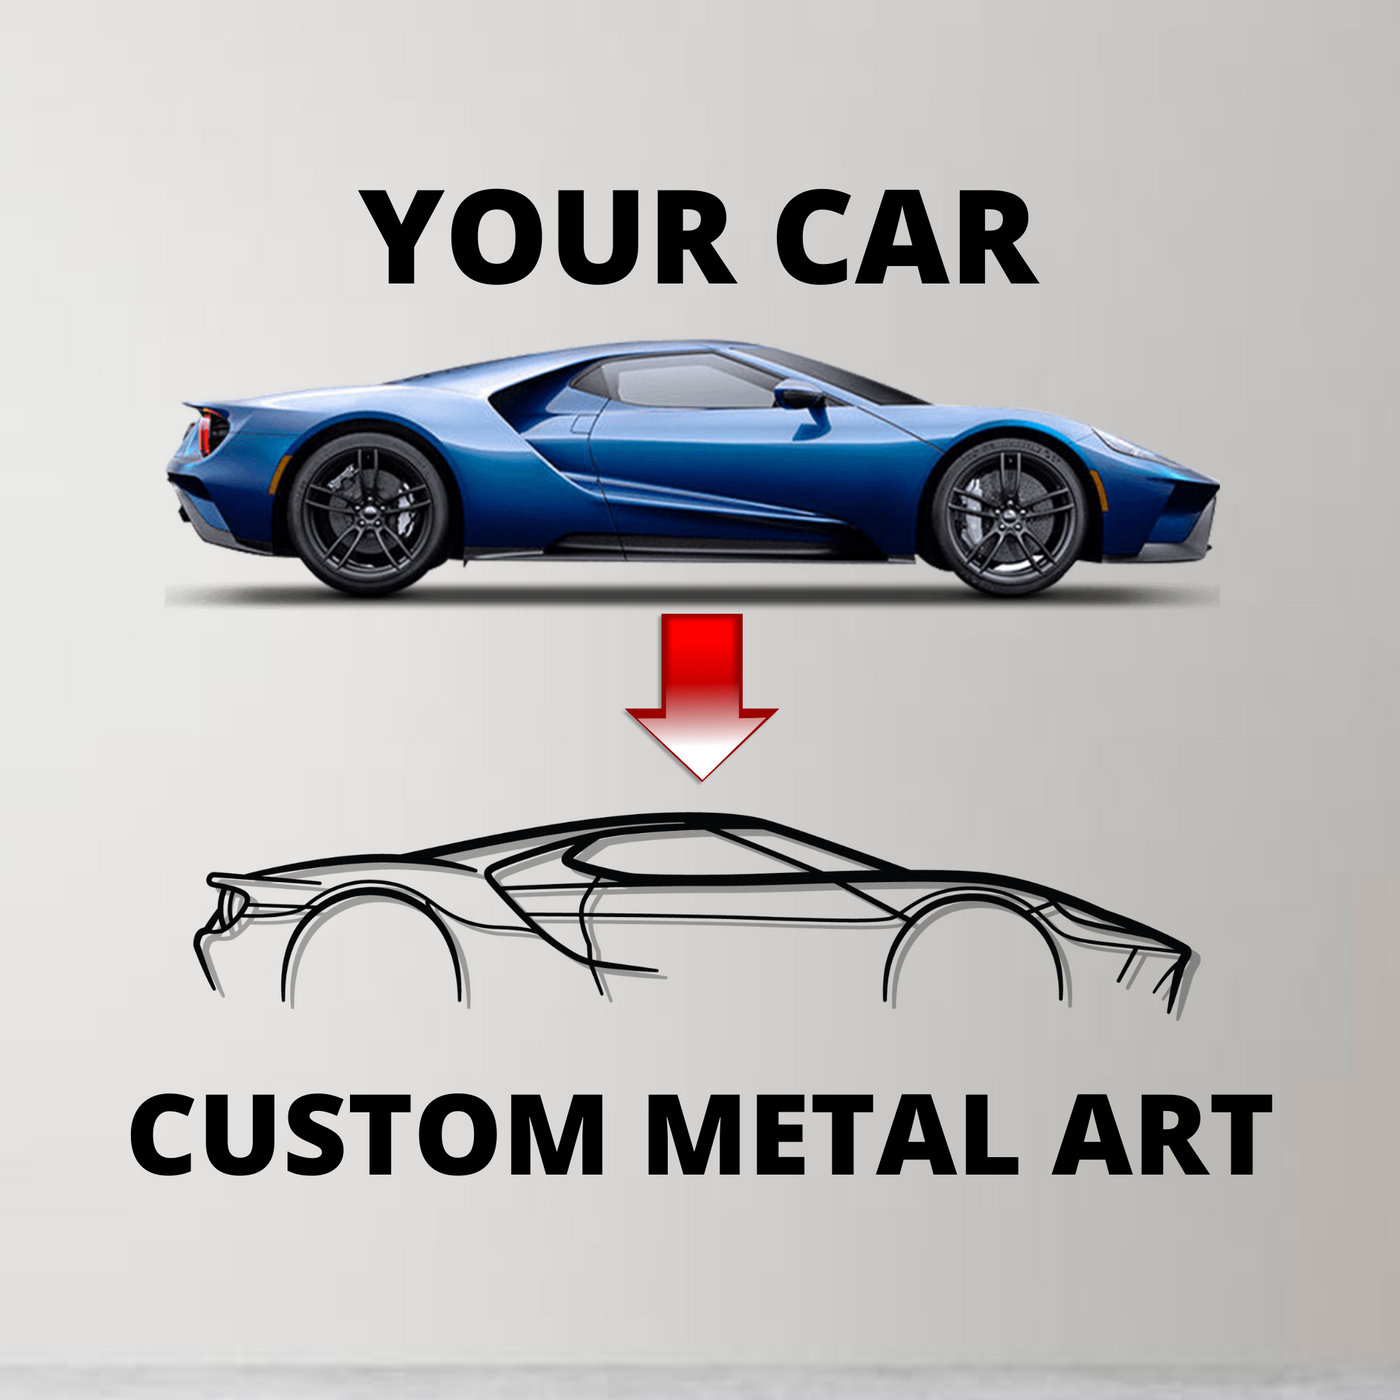 900 Convertible 1990 Detailed Silhouette Metal Wall Art